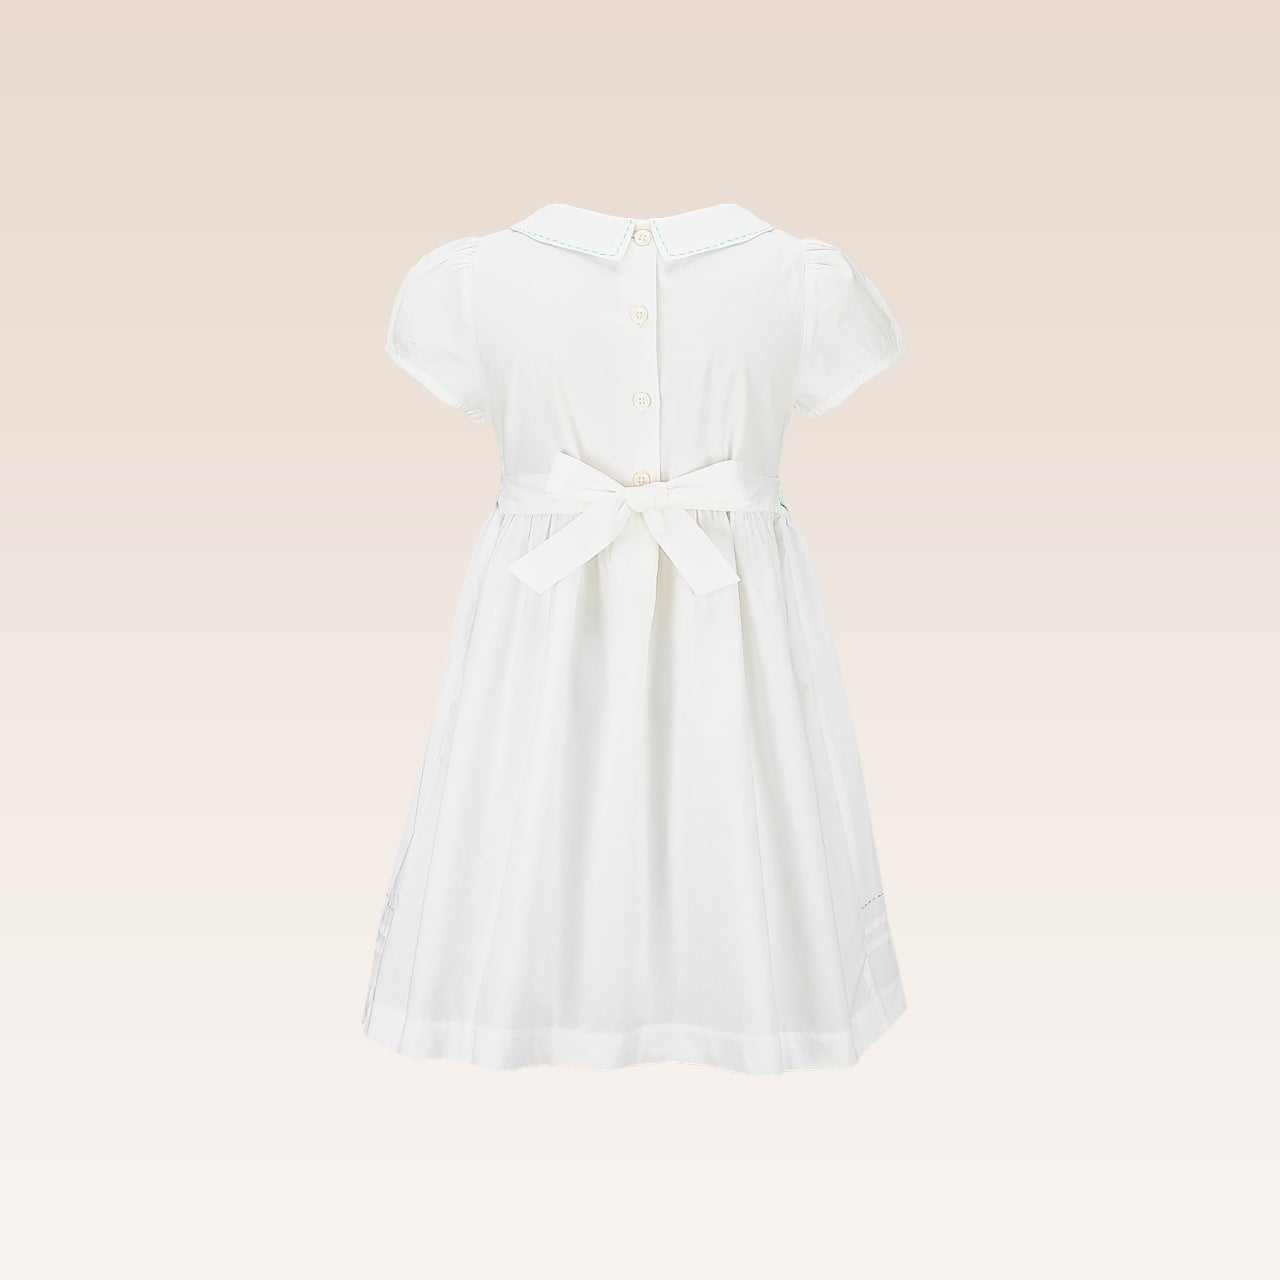 Hazel Girls Dress Ivory with Smock and Embroidery details